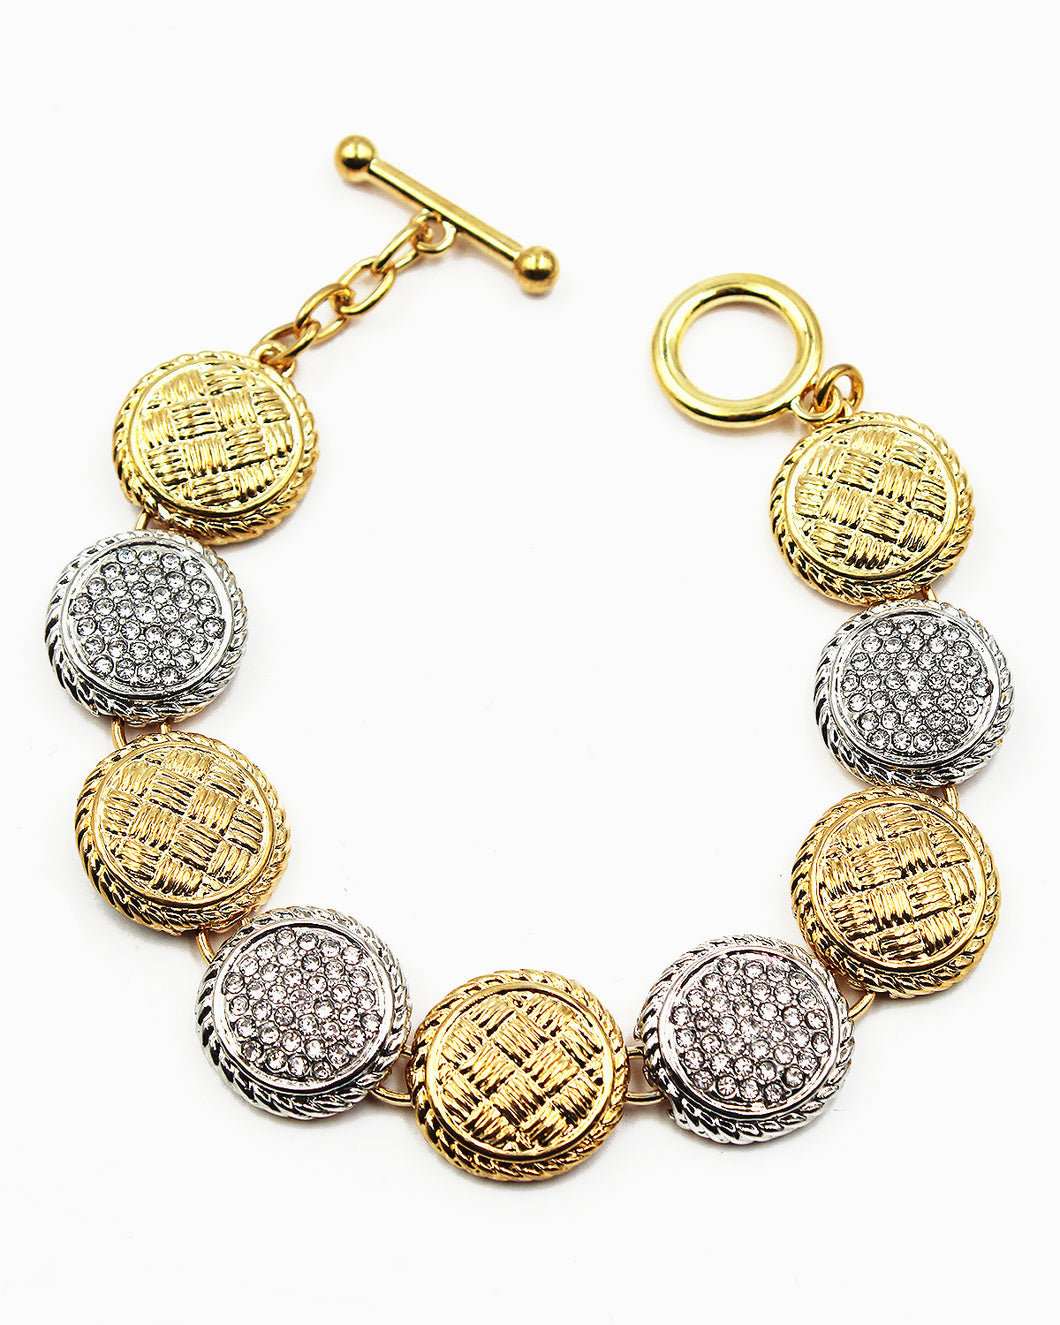 Two Tone Coin Bracelet with Pave Stones